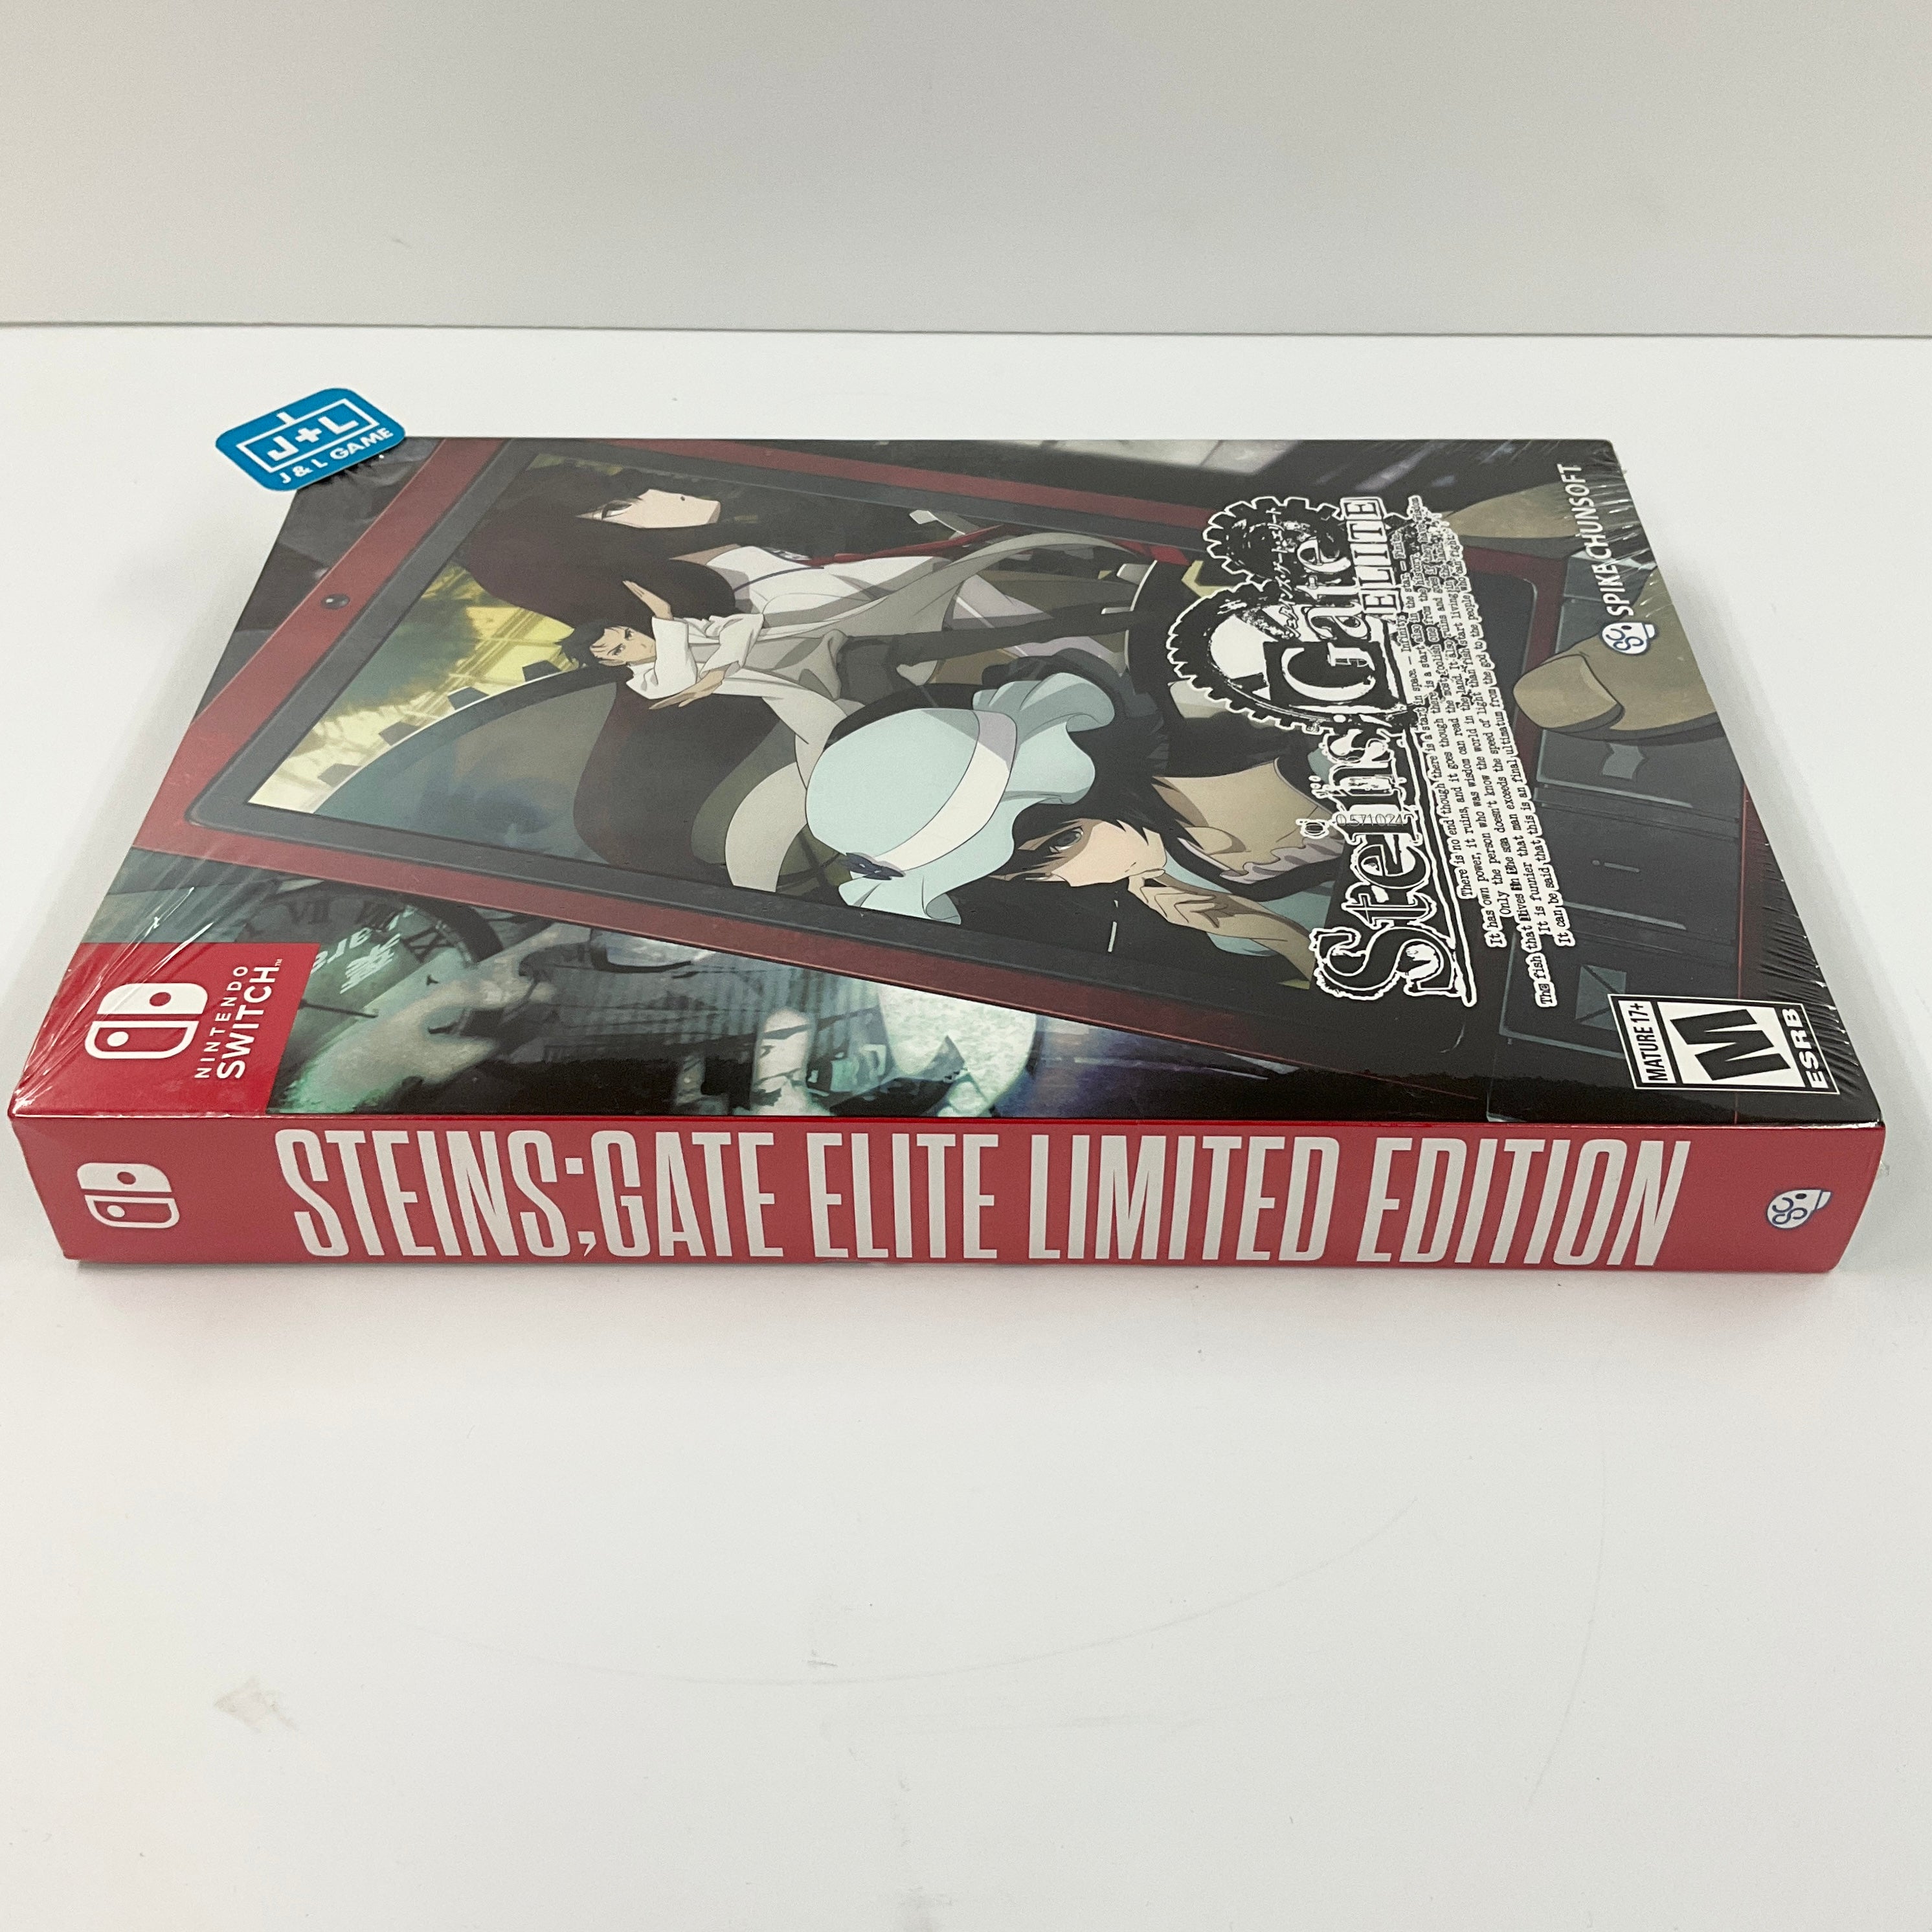 STEINS;GATE ELITE (Limited Edition) - (NSW) Nintendo Switch Video Games Spike Chunsoft   